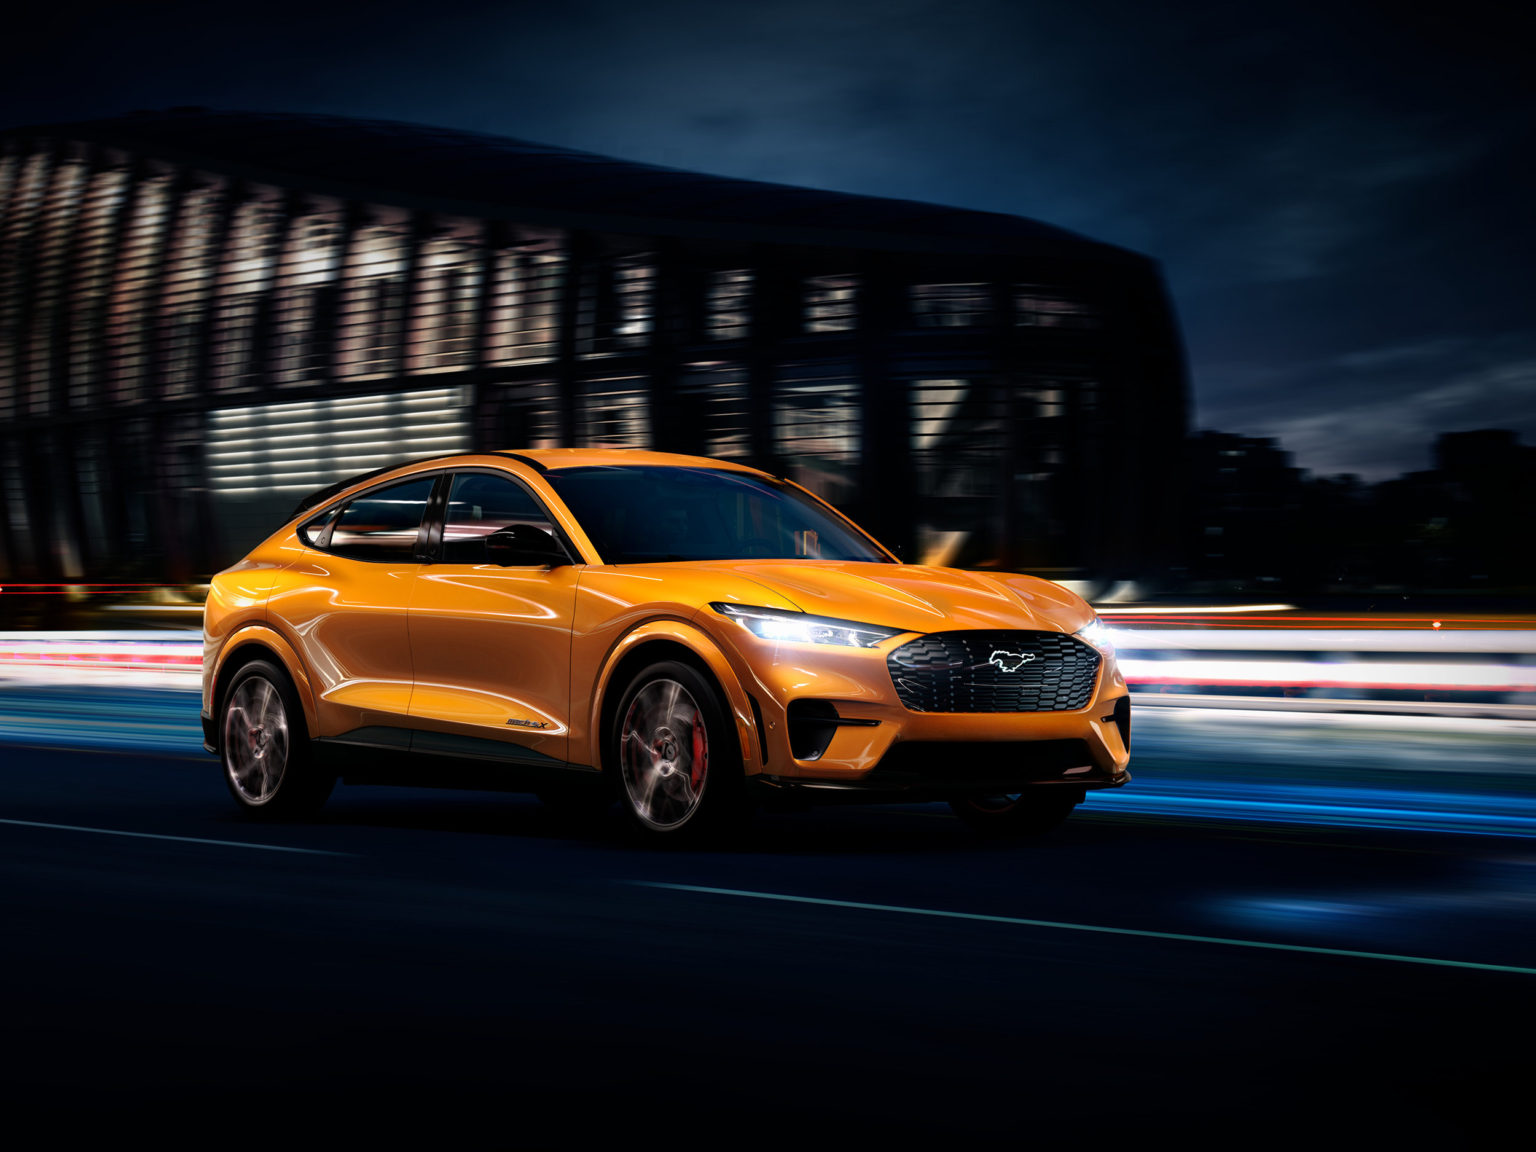 The Ford Mustang Mach-E GT will now be available in Cyber Orange.